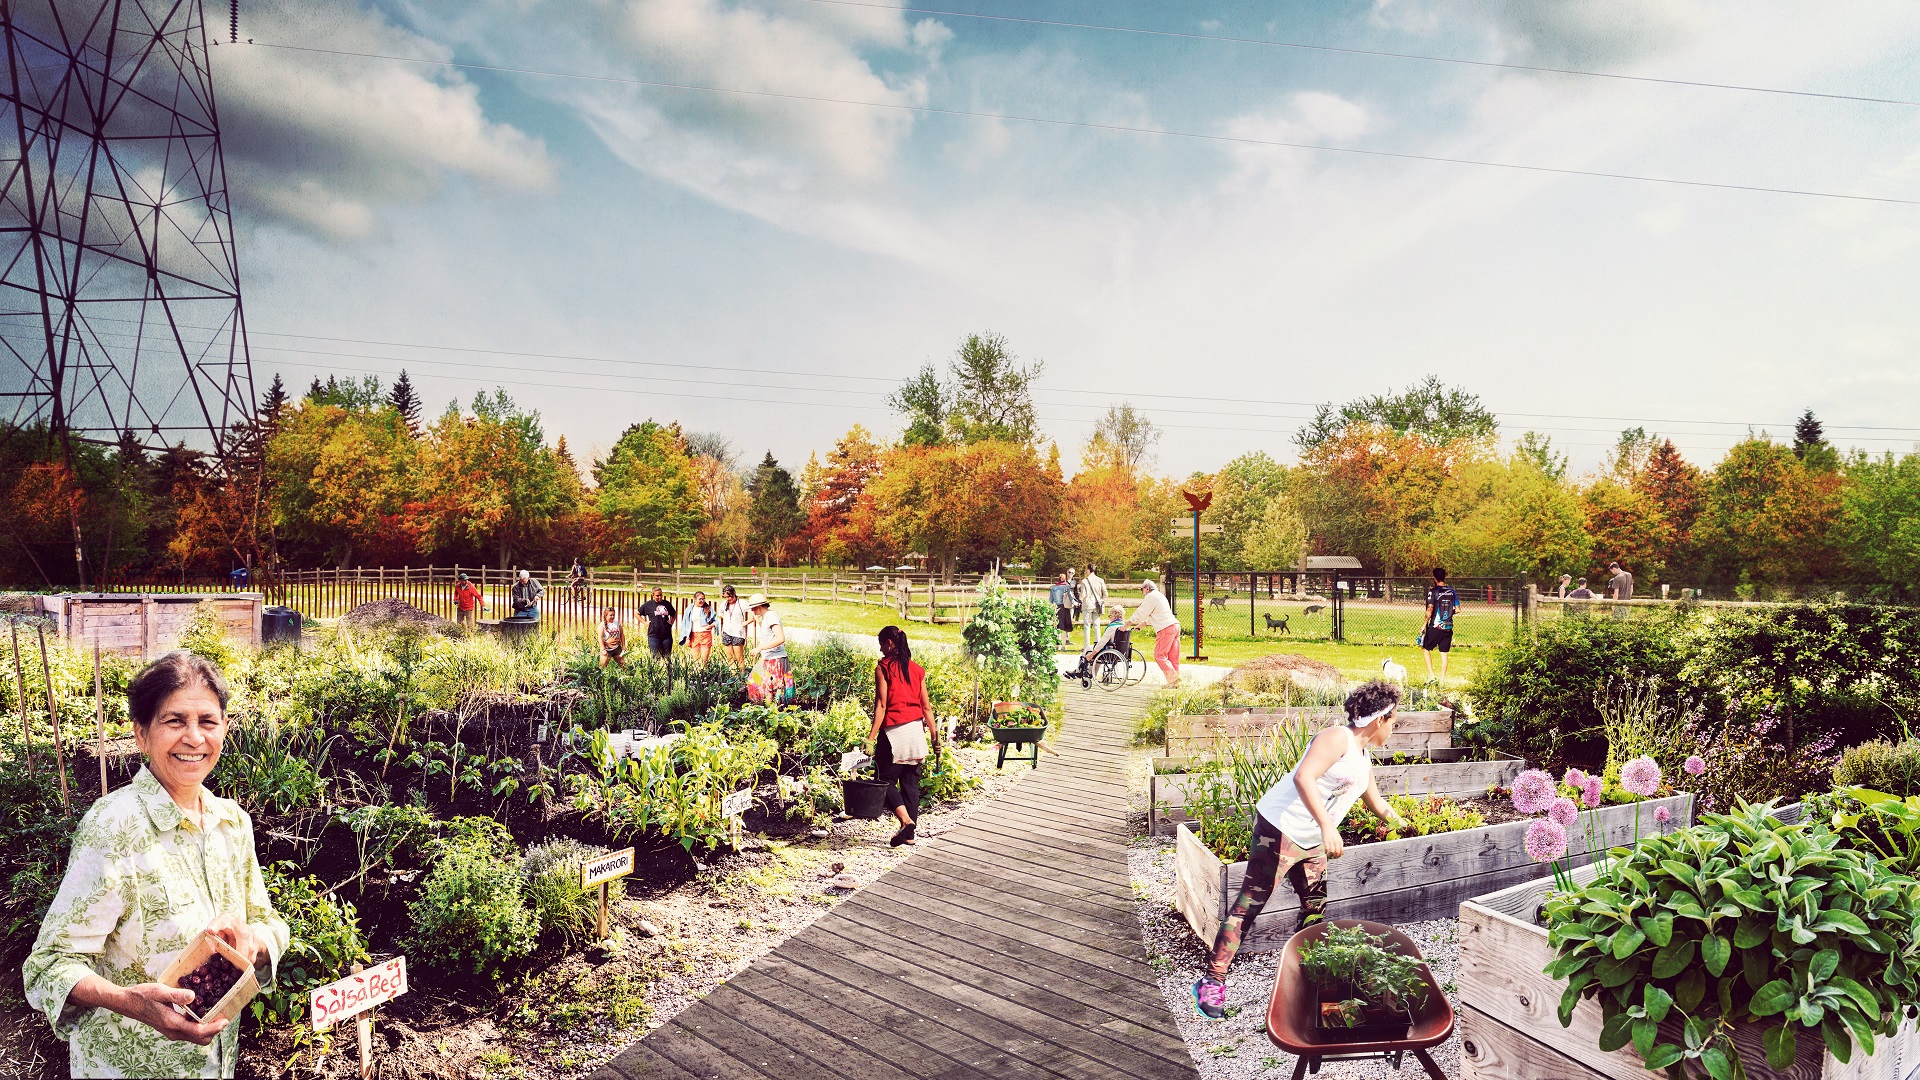 conceptual rendering of urban agriculture in The Meadoway